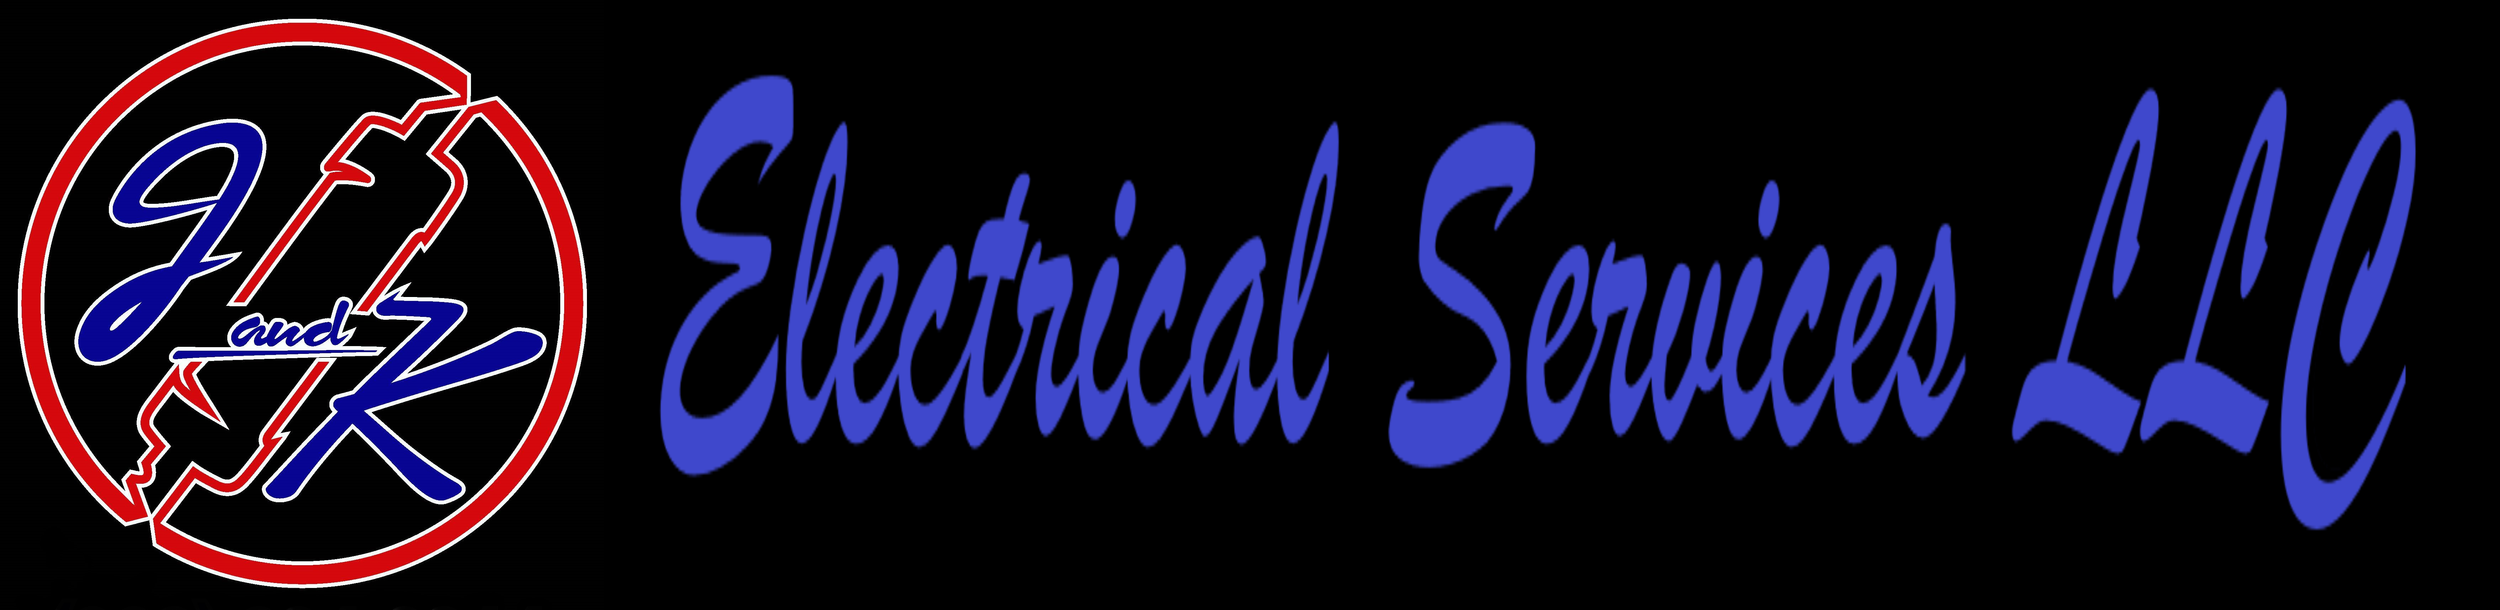 J and K Electrical Services LLC   